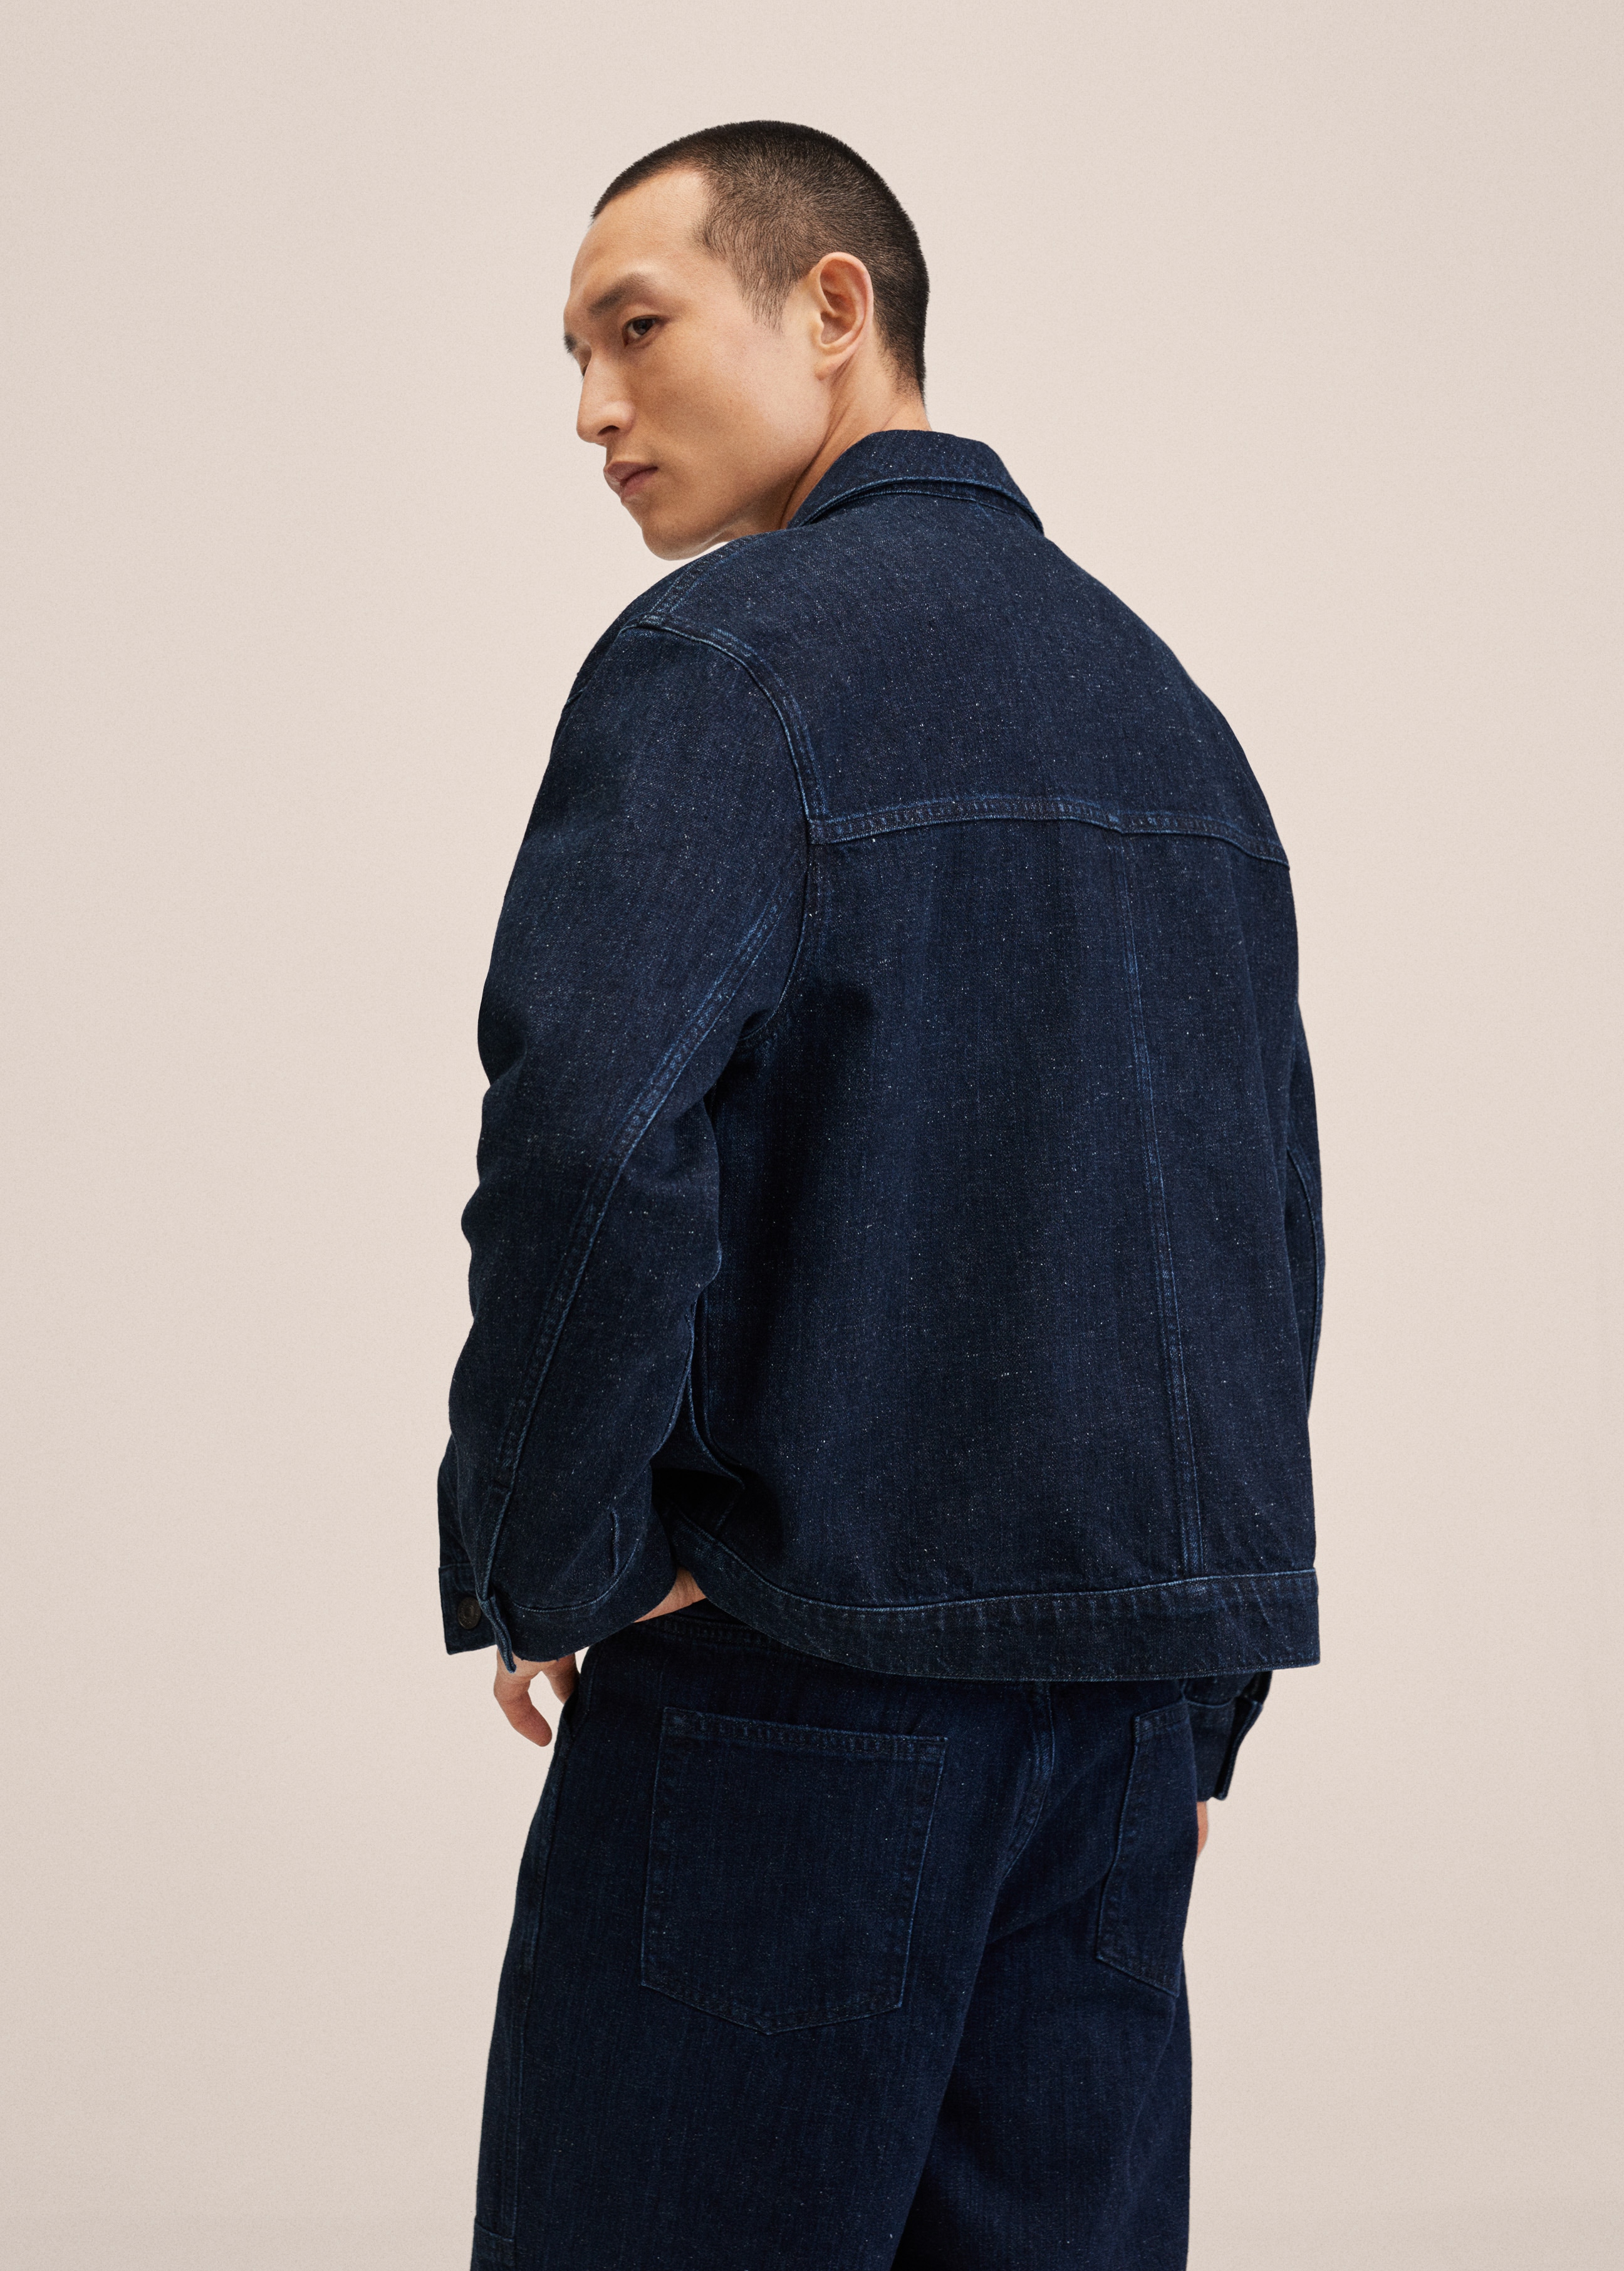 Marbled denim overshirt - Reverse of the article